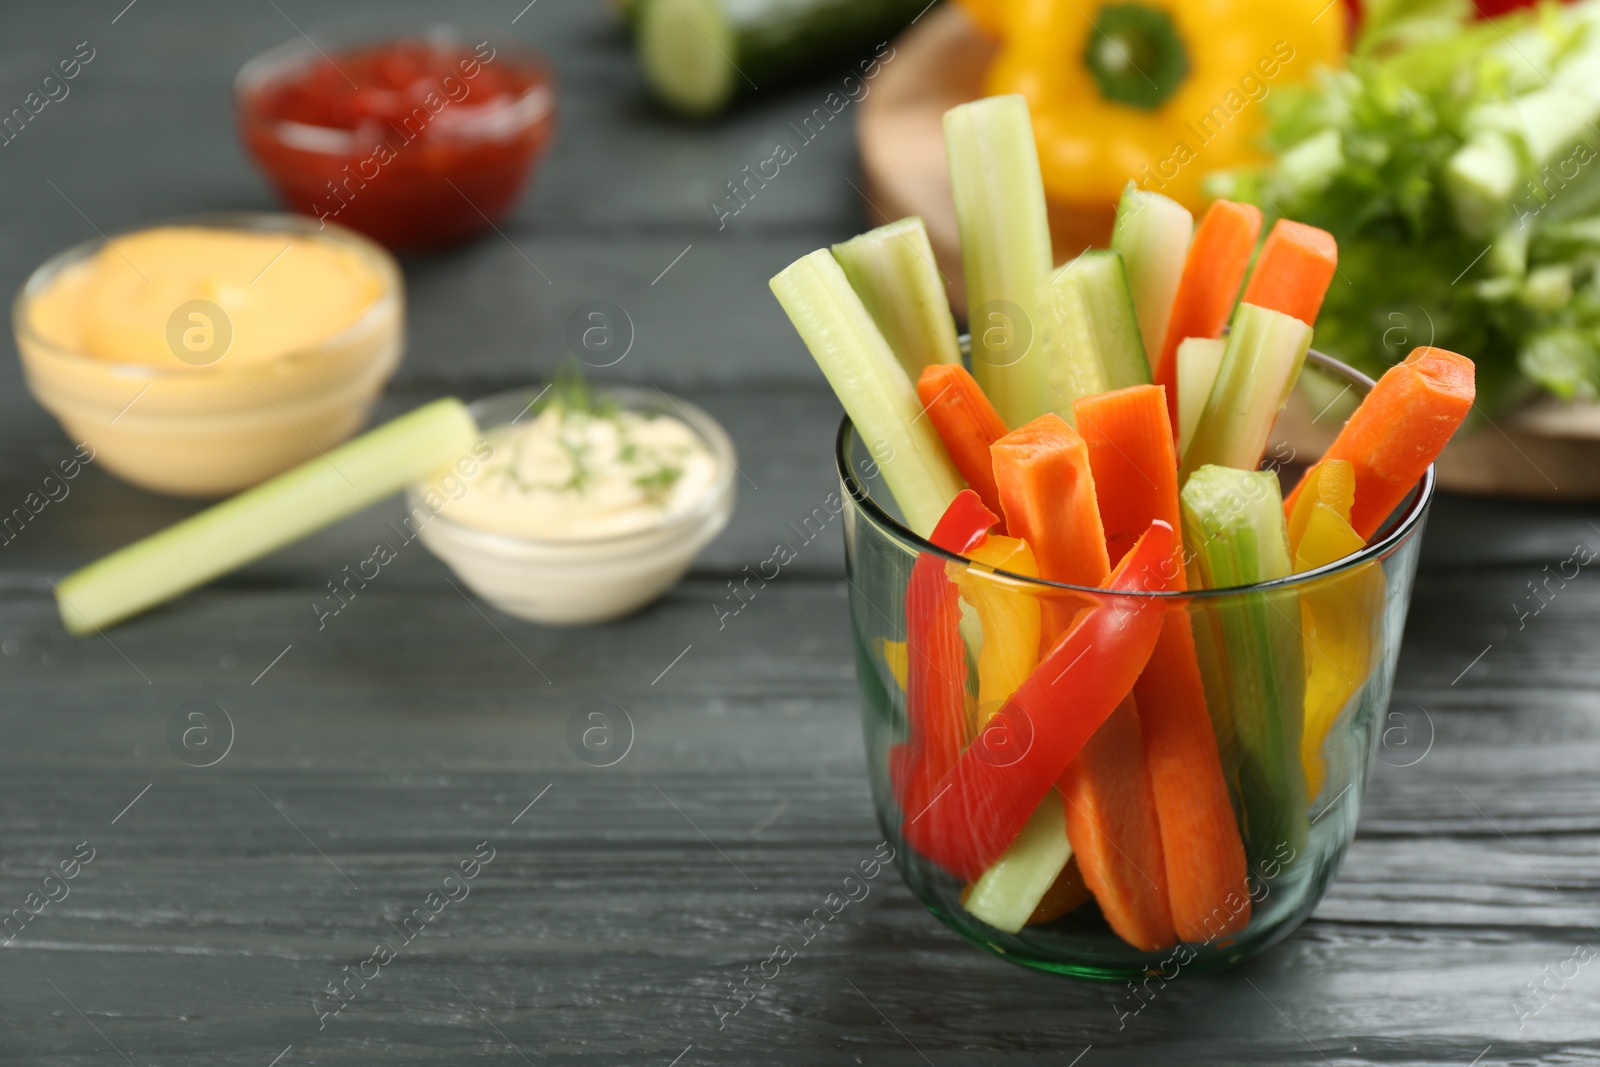 Photo of Celery and other vegetable sticks in glass on grey wooden table